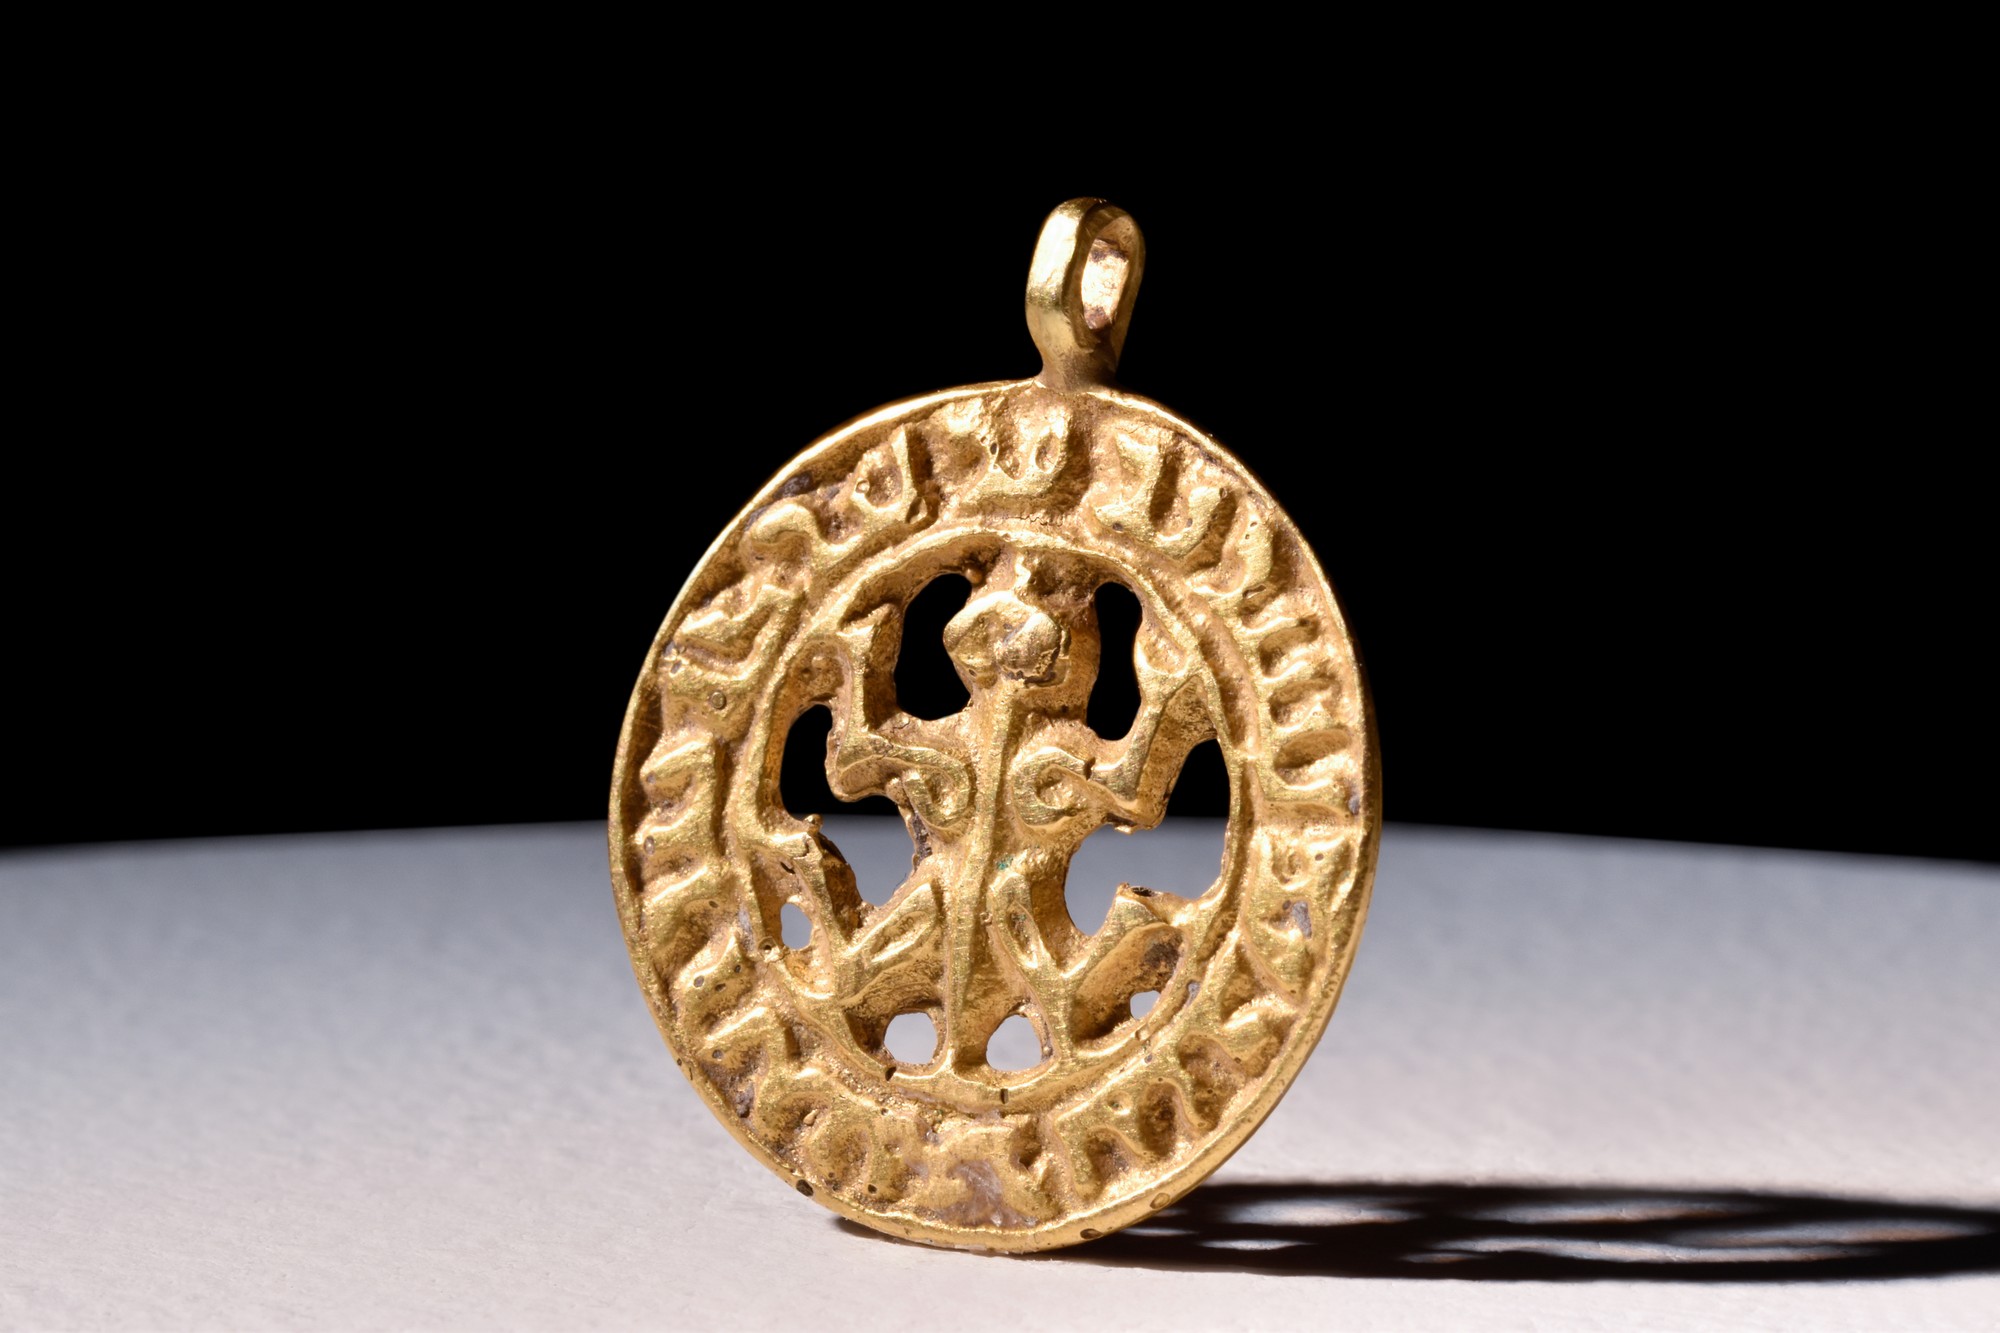 PSEUDO ARABIC GOLD PENDANT WITH A FROG